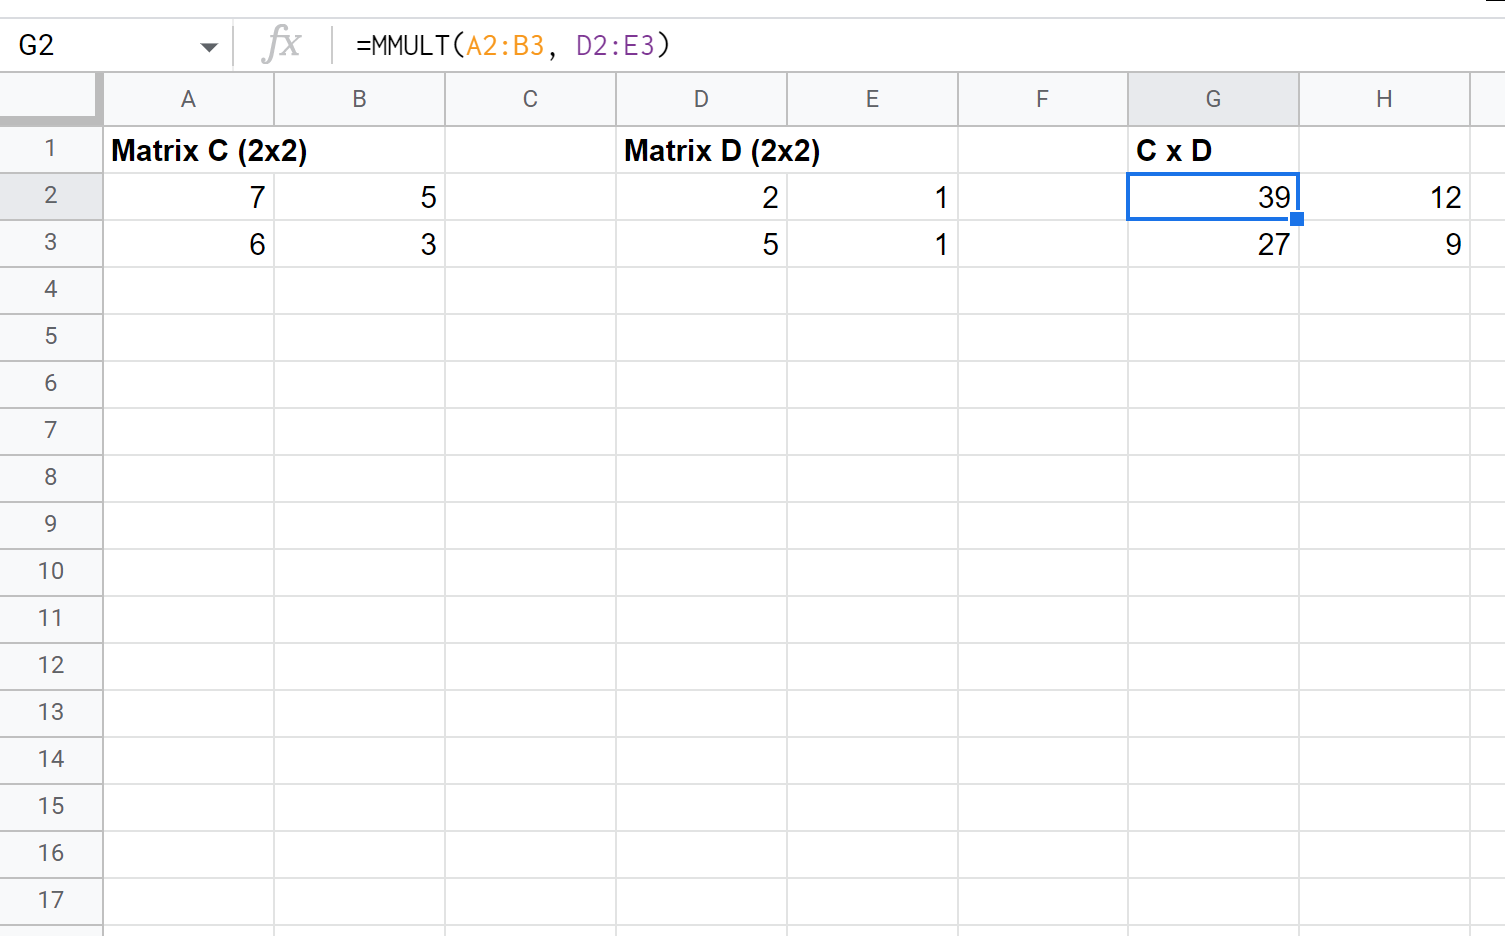 2x2 by 2x2 matrix multiplication in Google Sheets